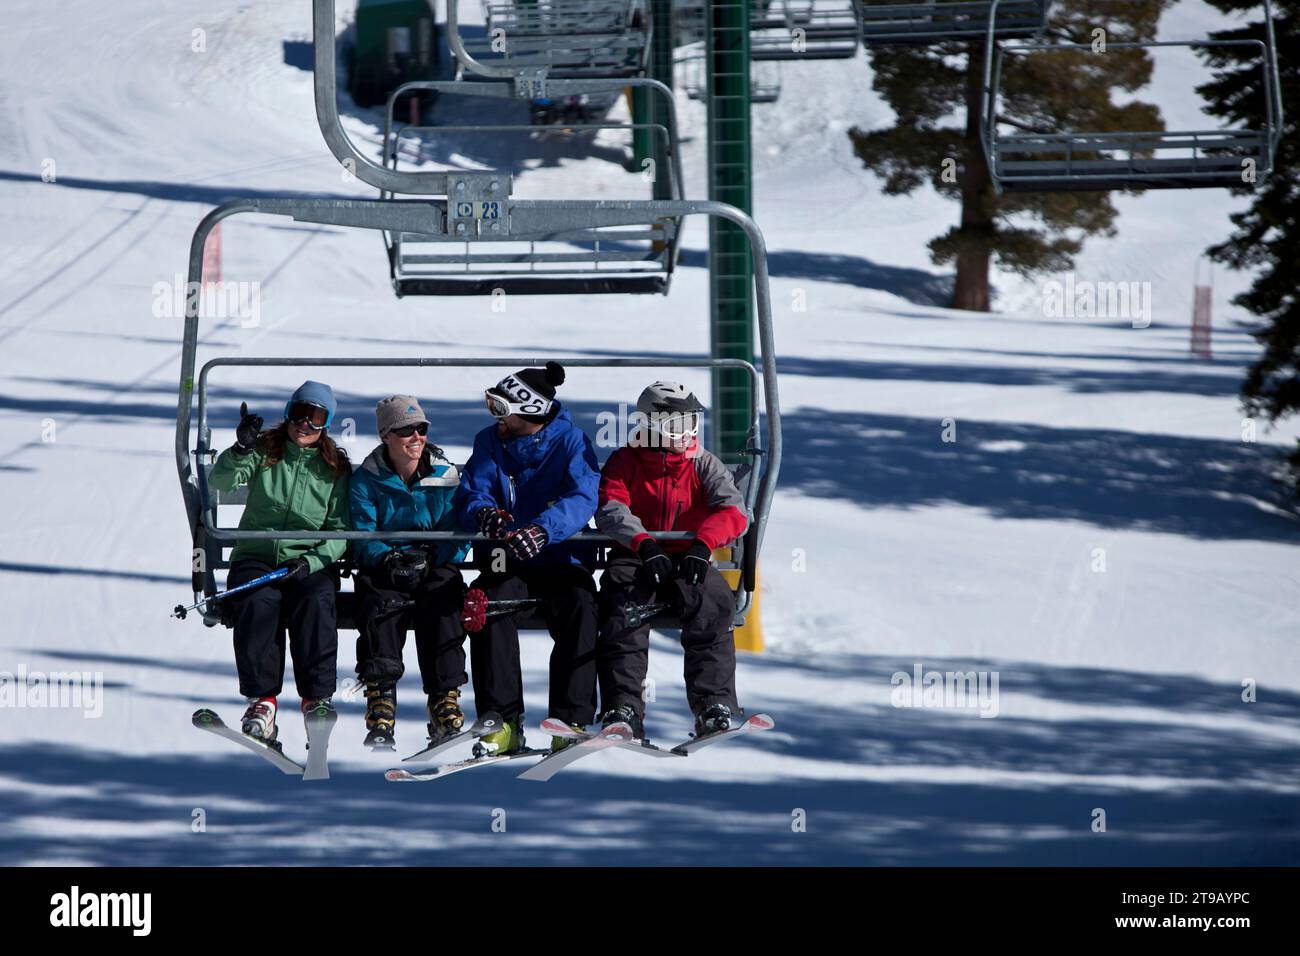 Ski instructor with his class having fun on a chairlift. Stock Photo